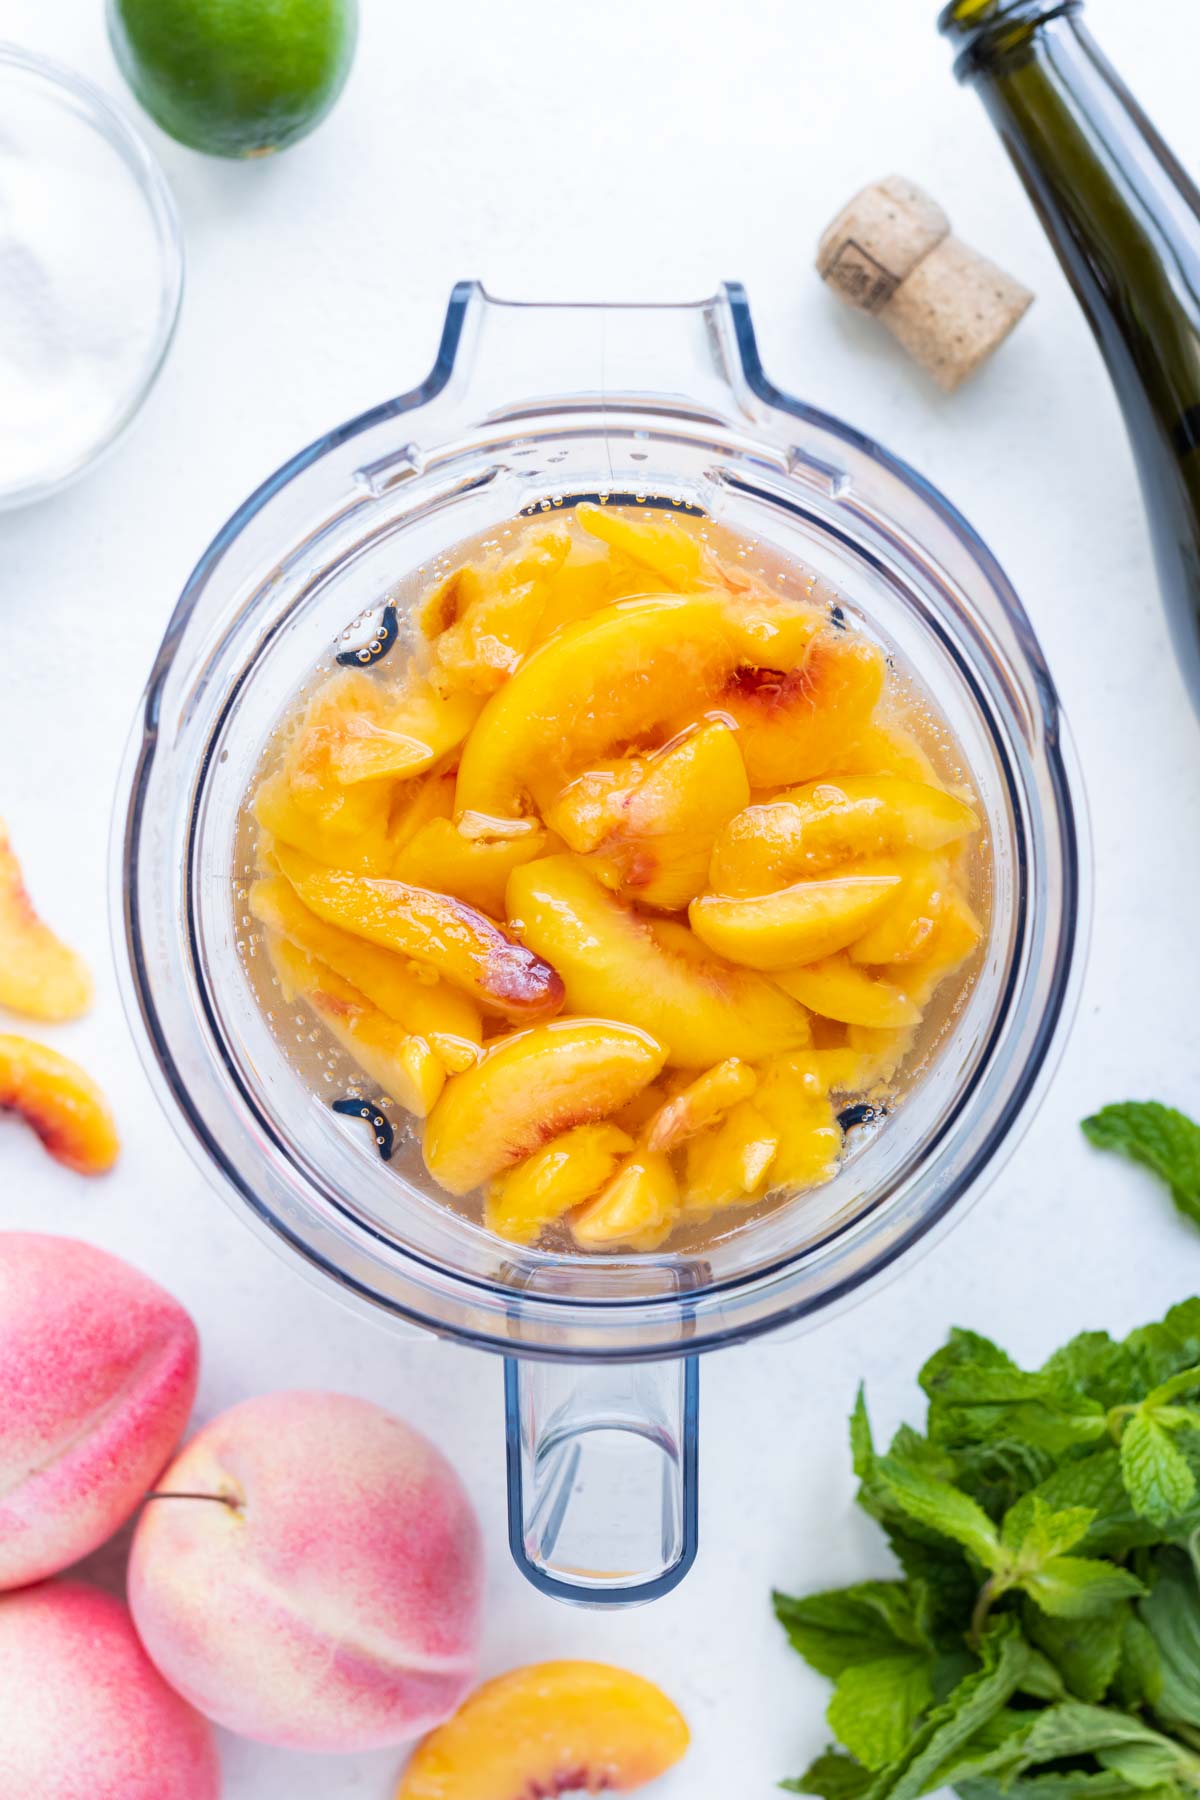 Frozen peaches and prosecco are combined in a food processor.